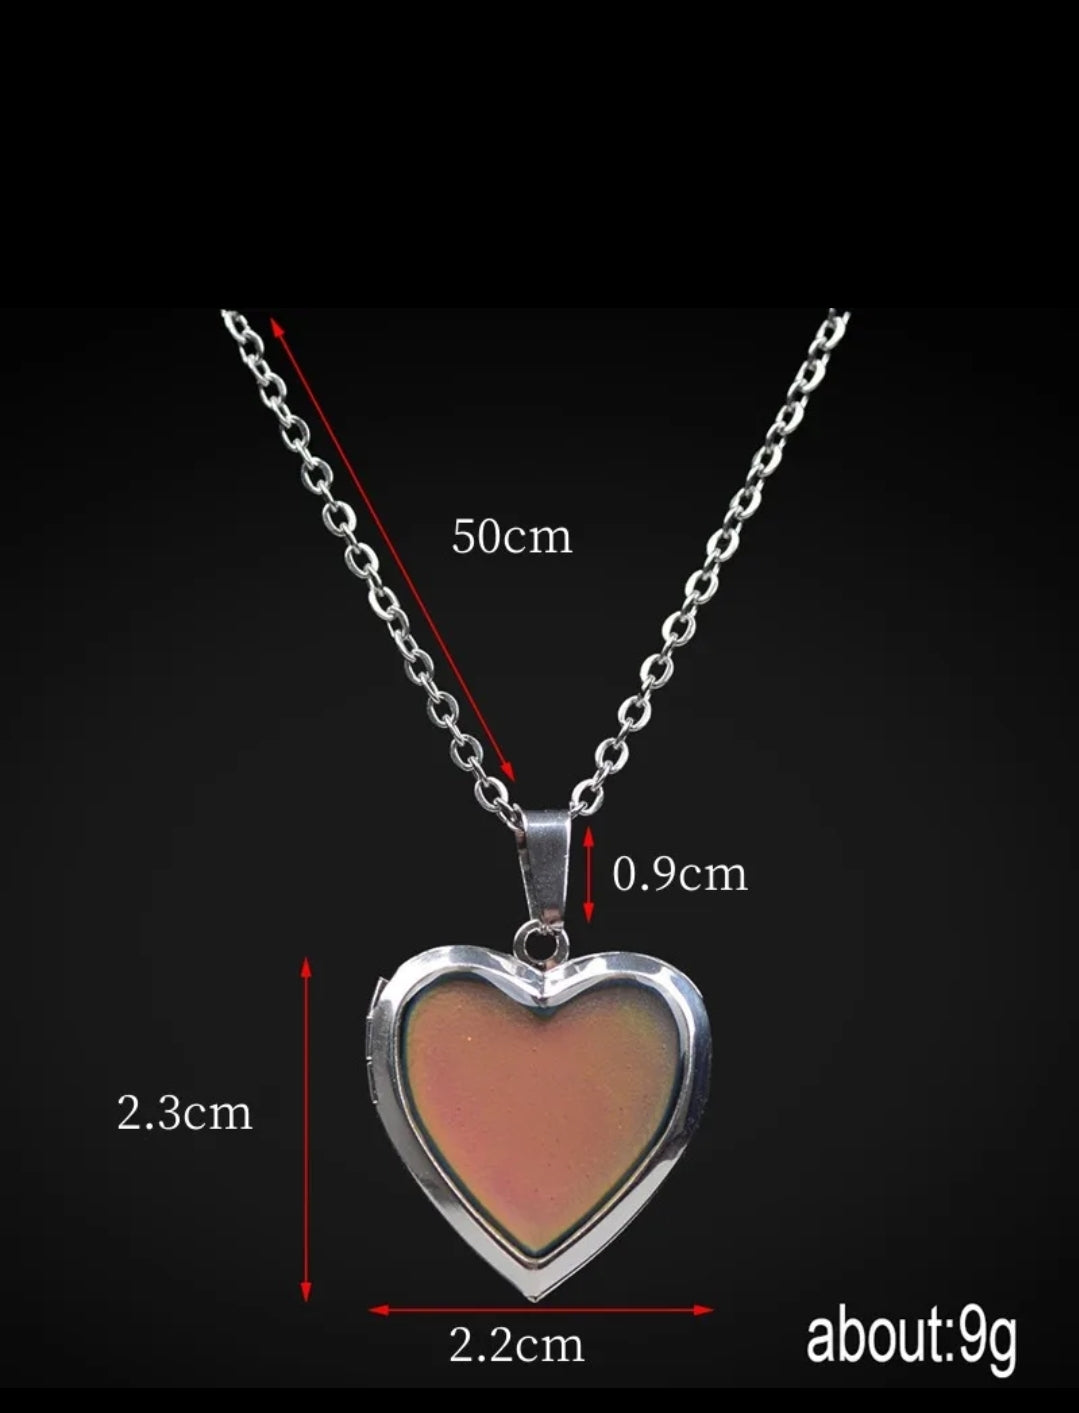 Mood Color Changing Heart Locket Pendant on Silver Necklace